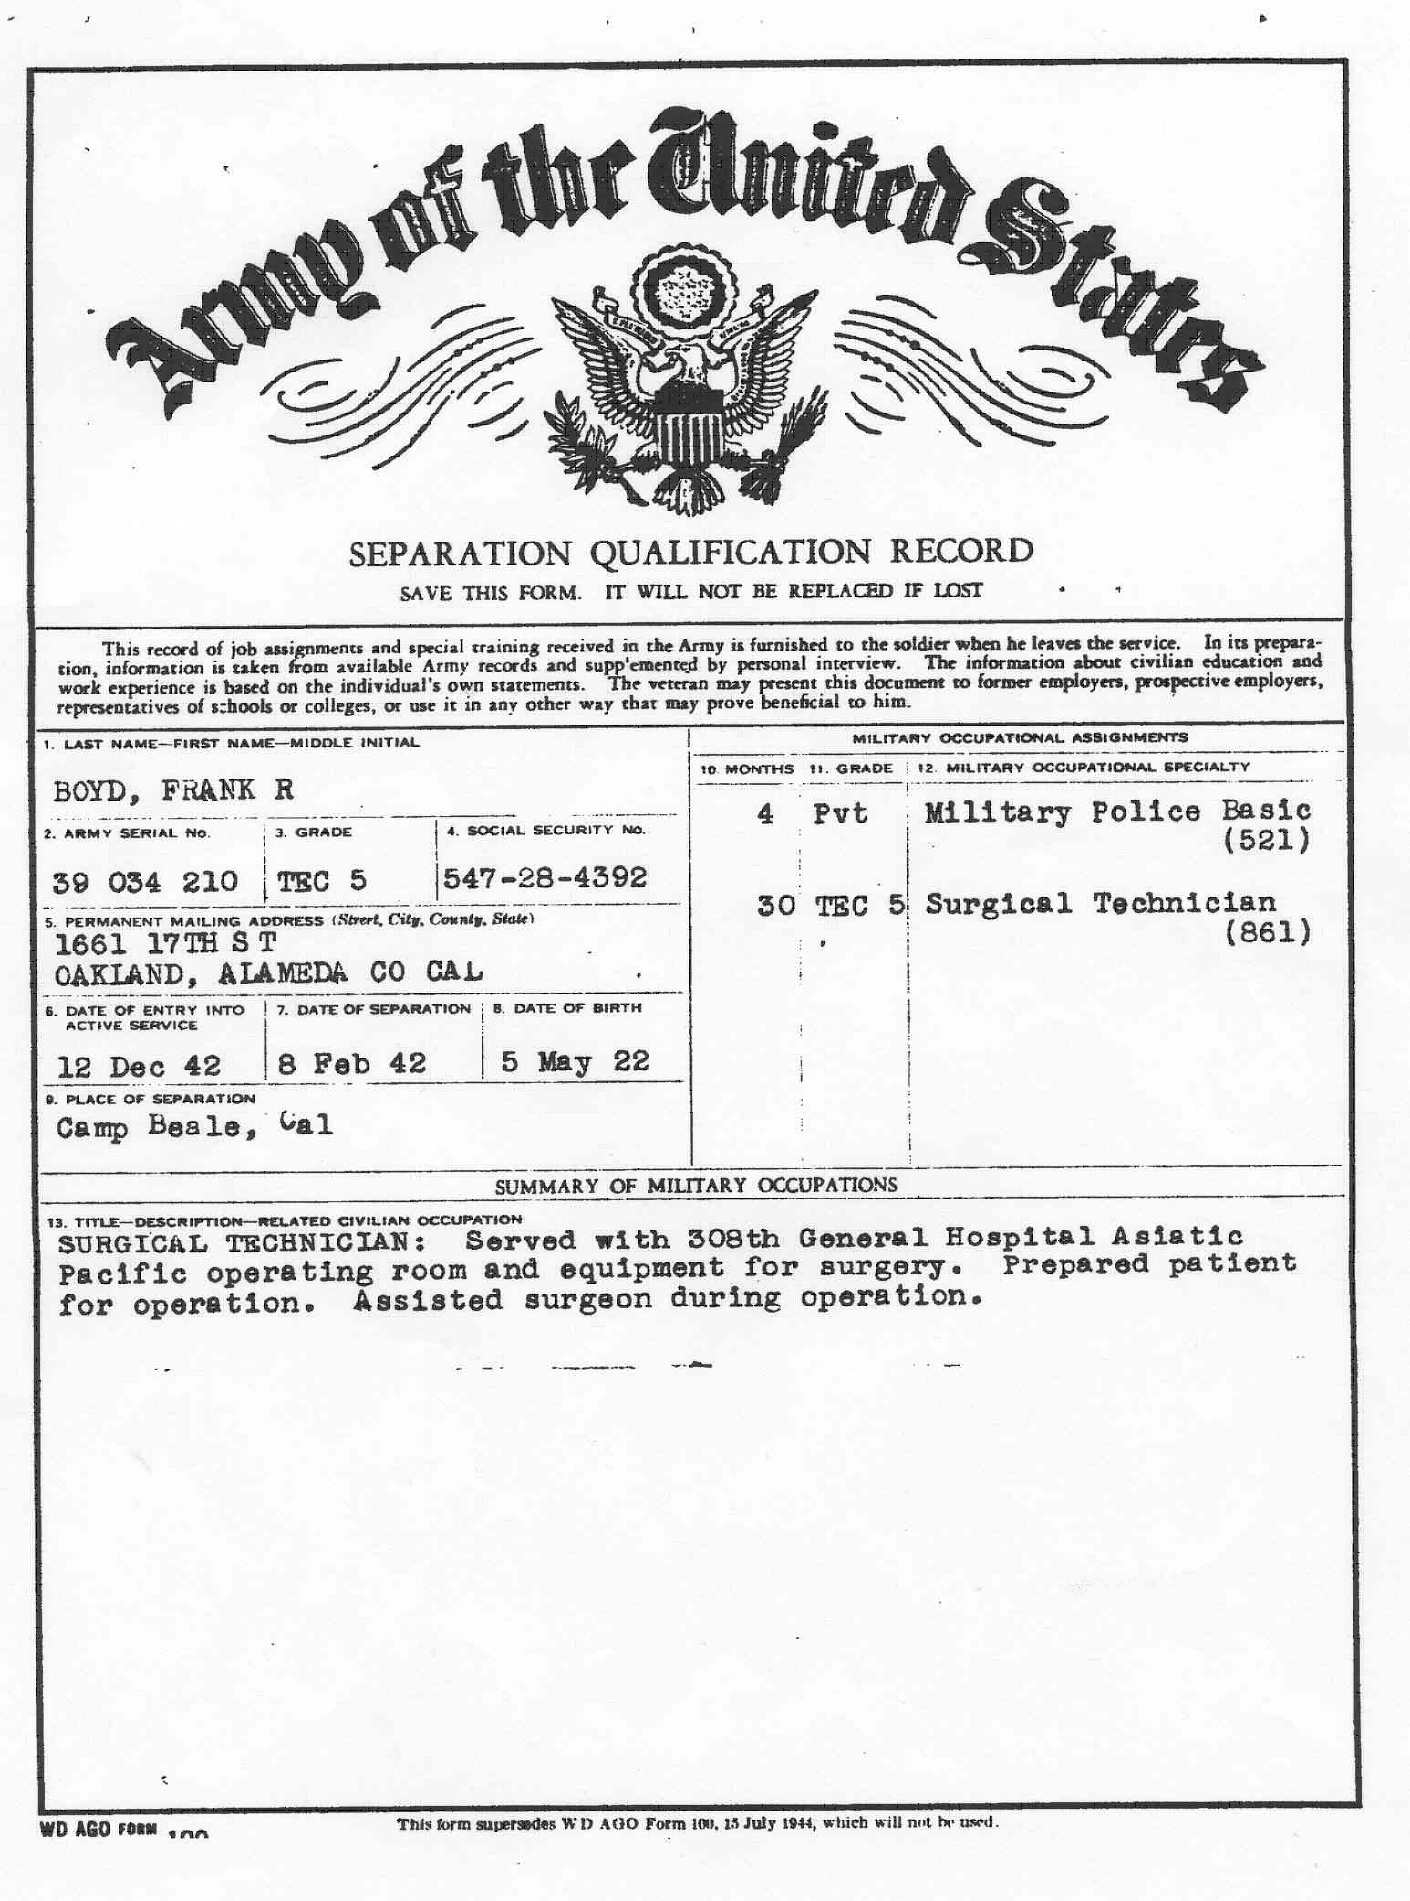 Separation qualification record, page 1, for Frank R. Boyd